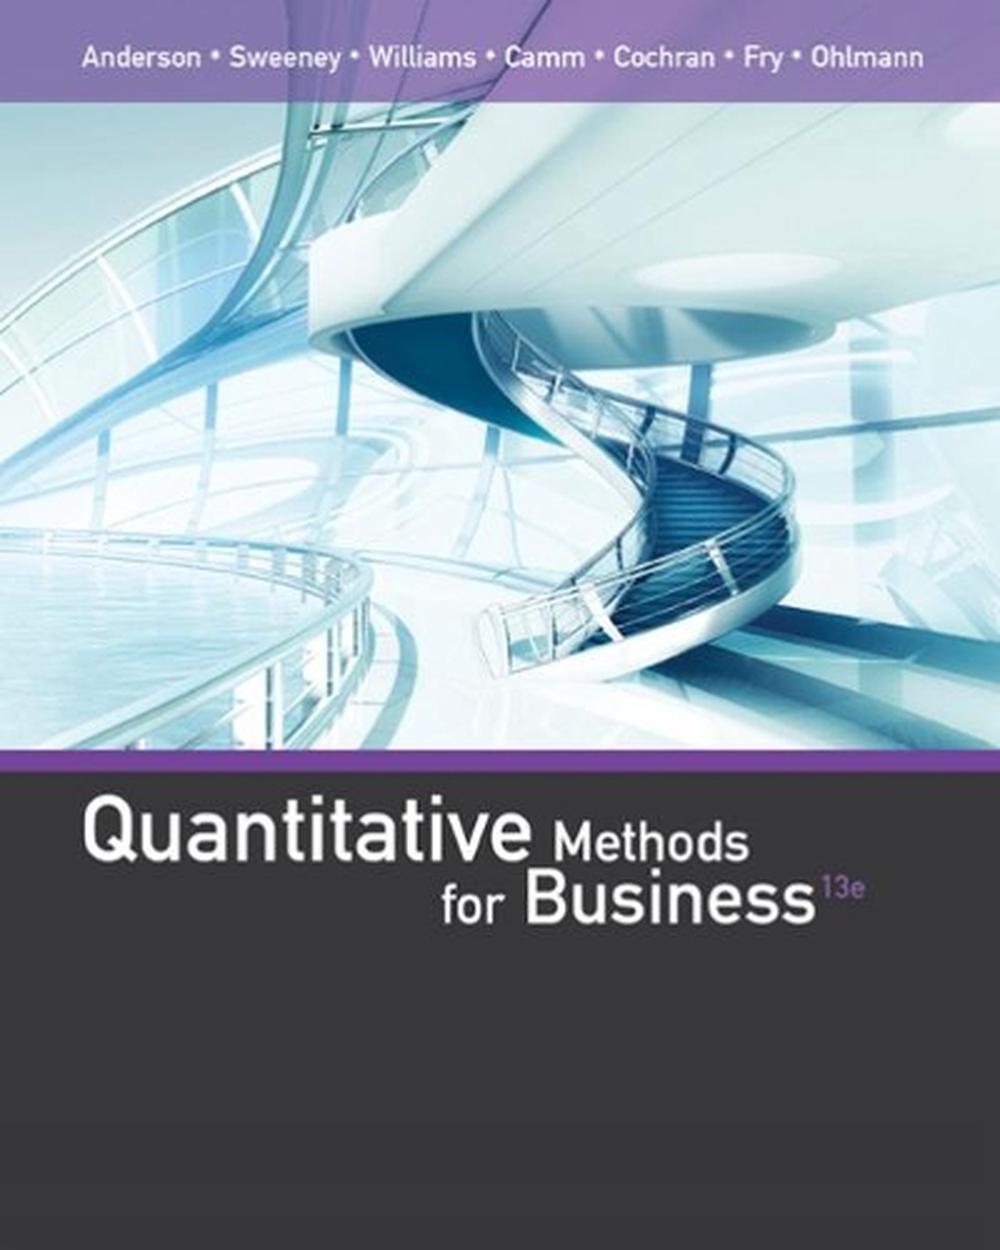 business research methods 13th edition pdf free download